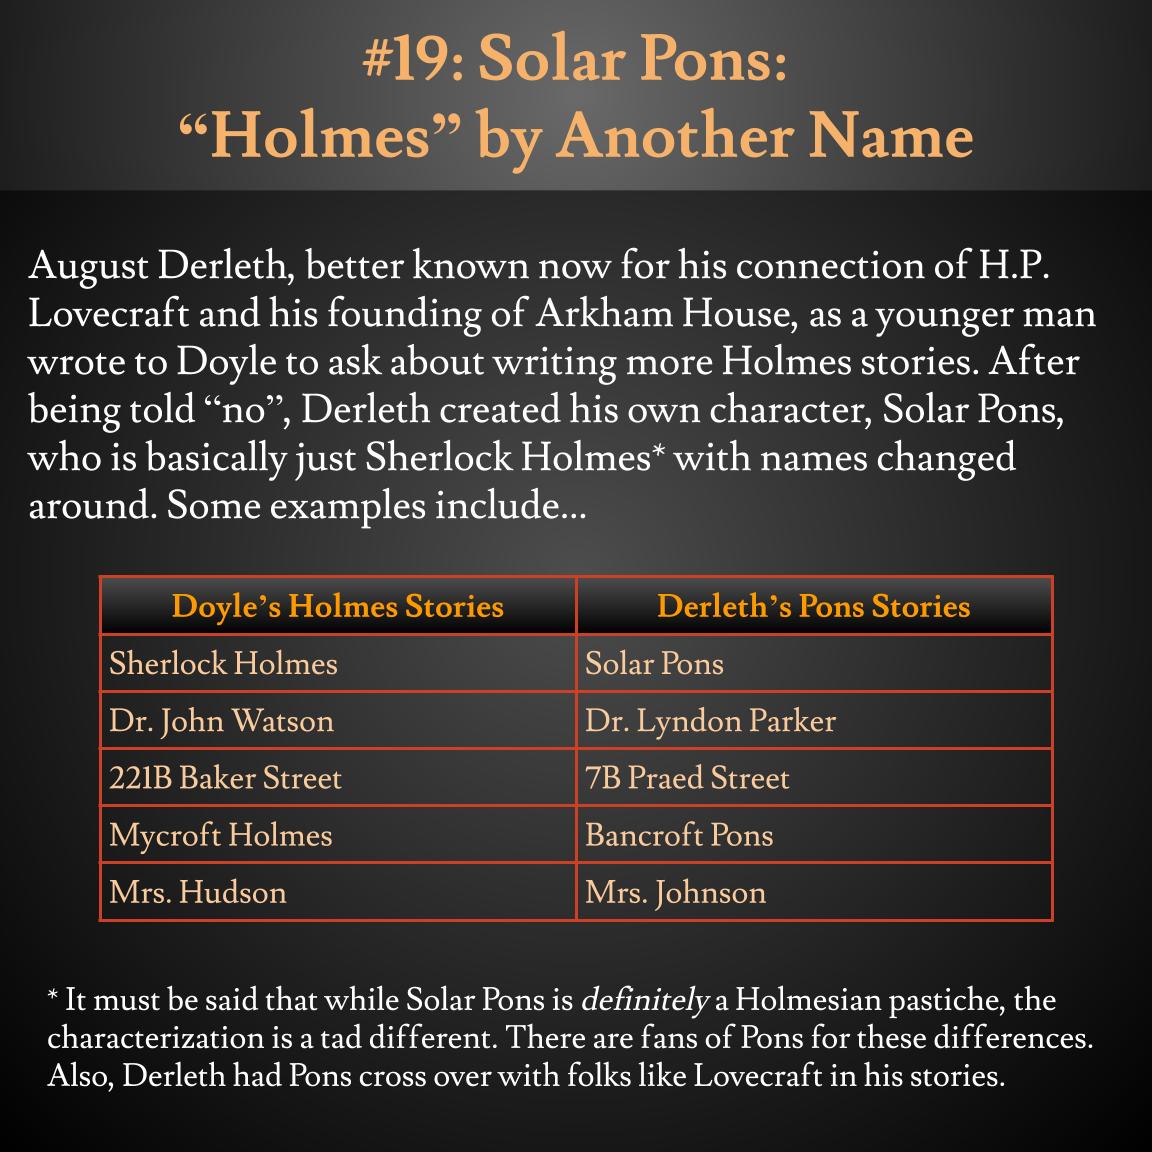 19 solar pons holmes by another name copy